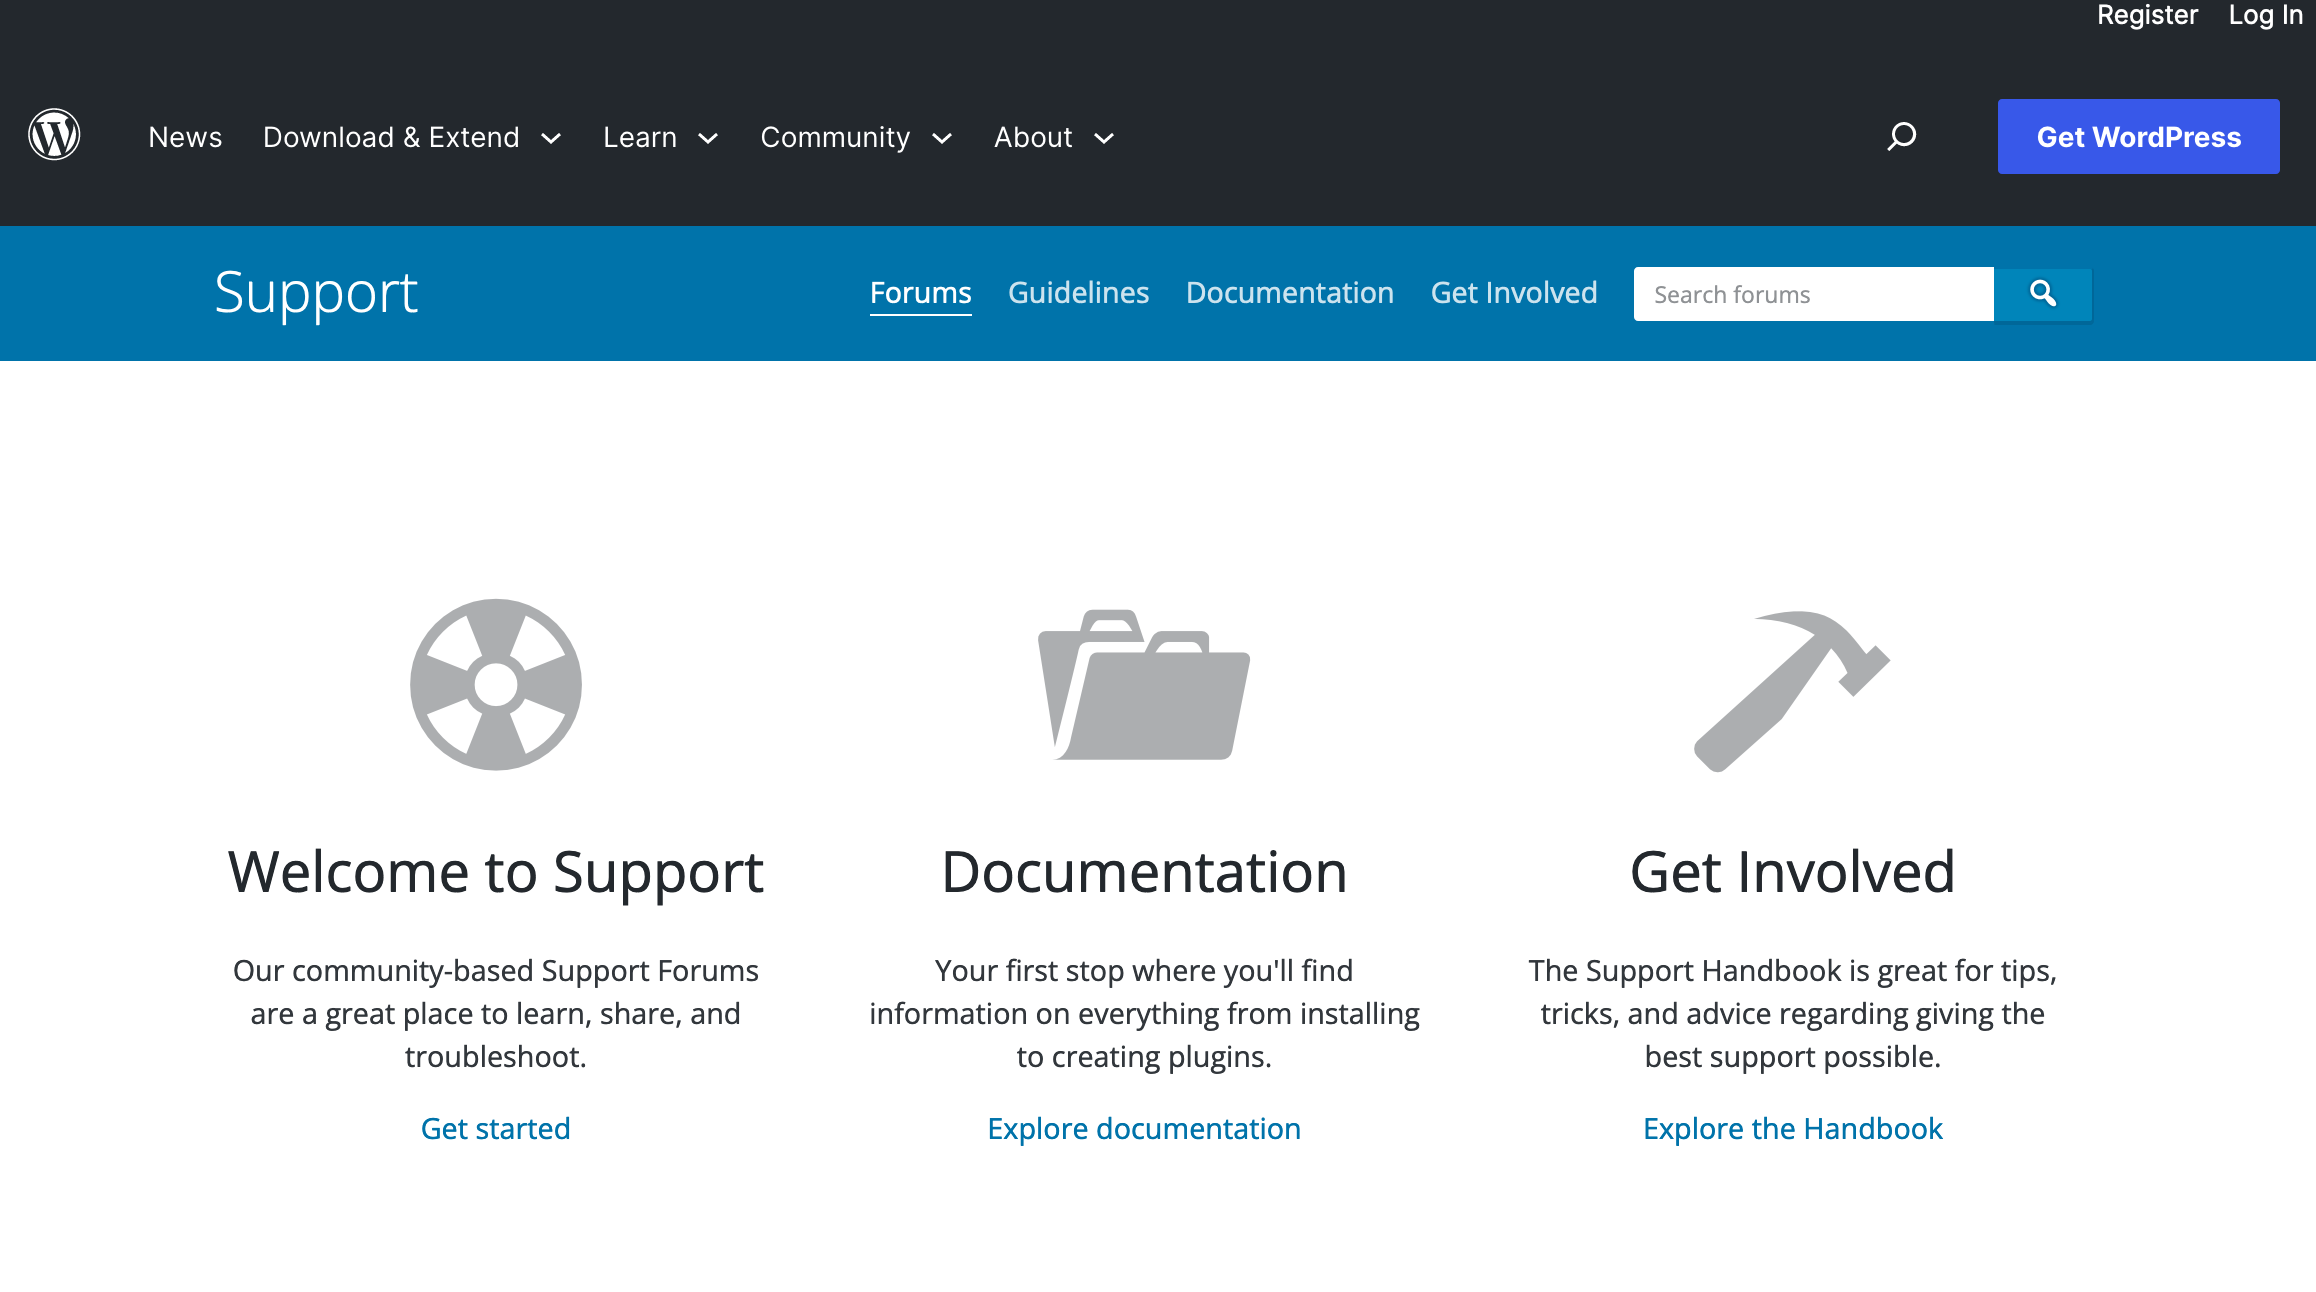 The official WordPress documentation and support page.